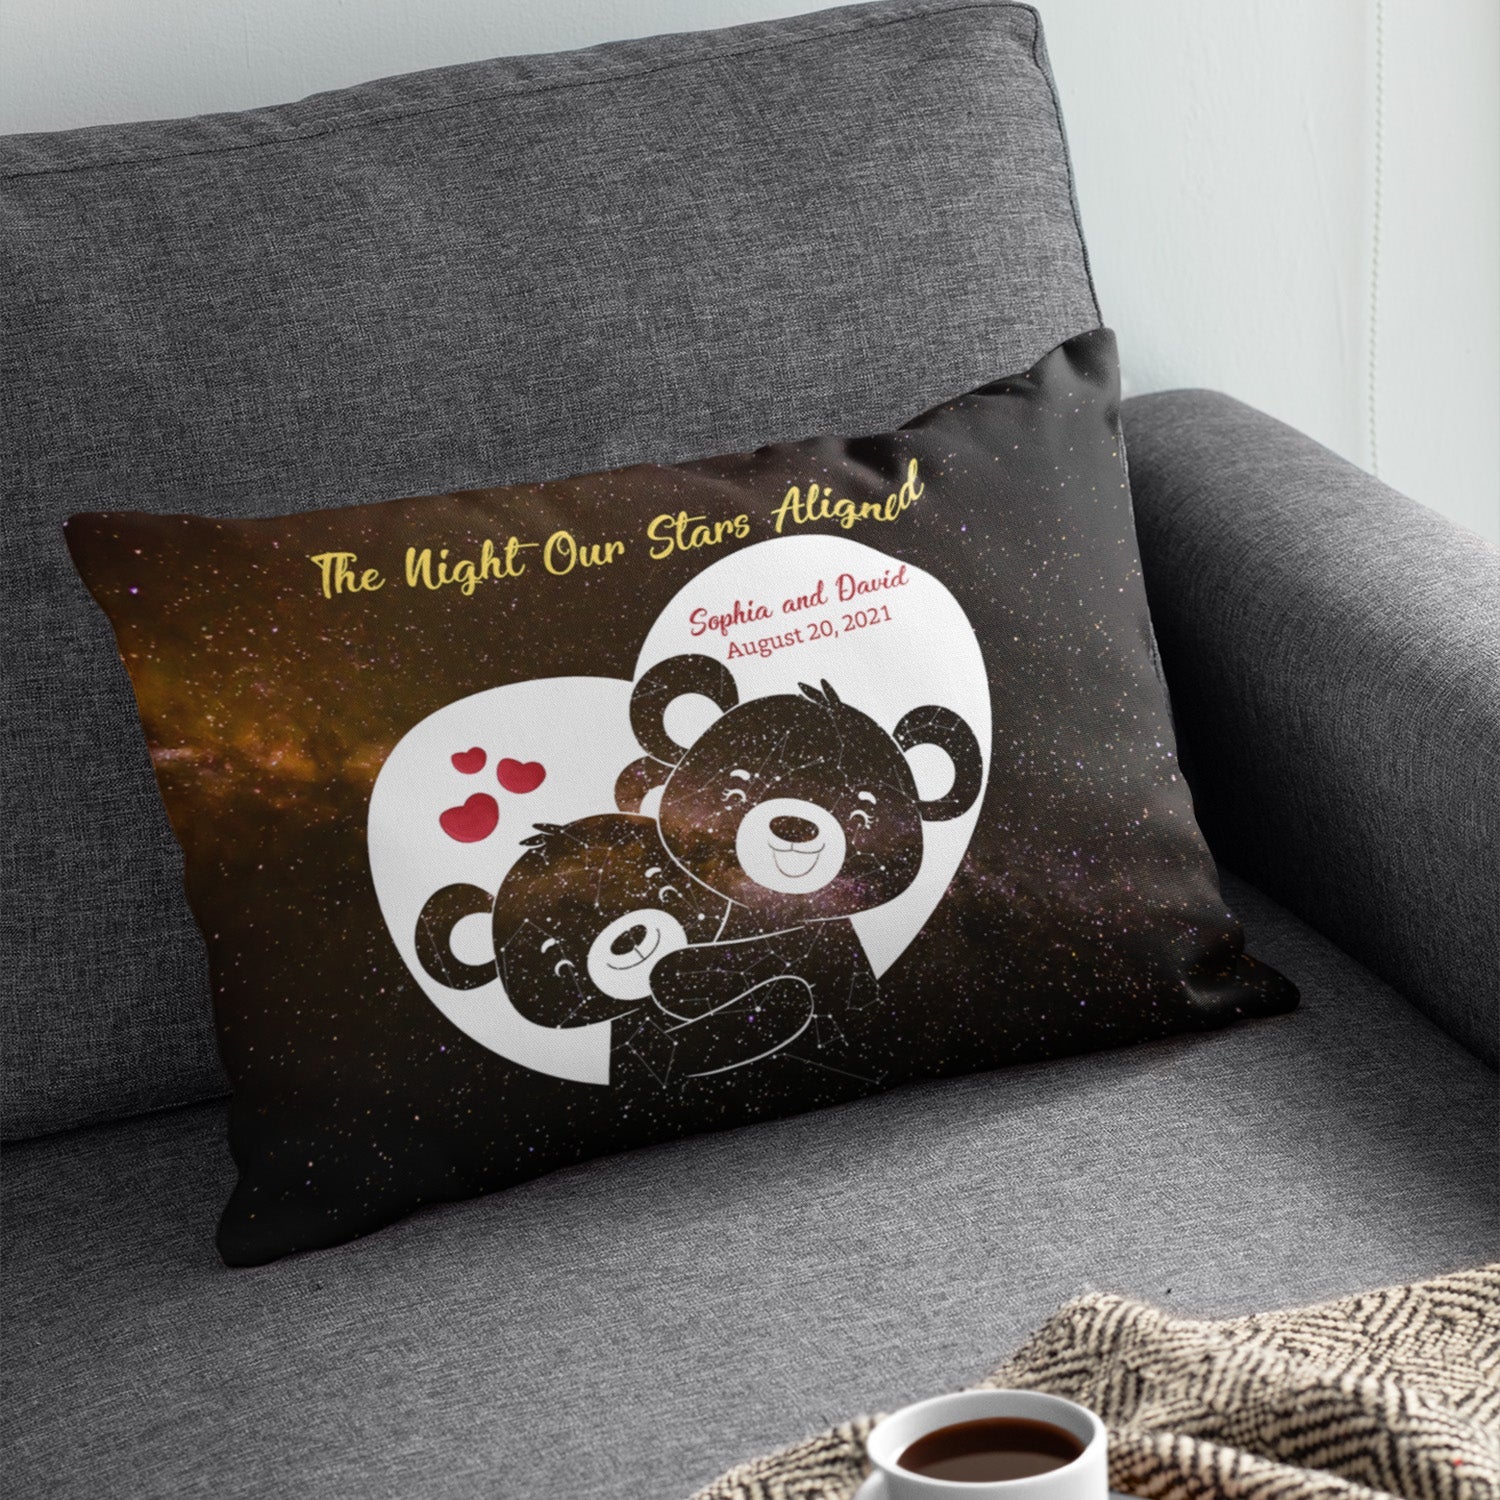 Custom Night Sky By Date And Location, Personalized Text, Black Bear, Pillow